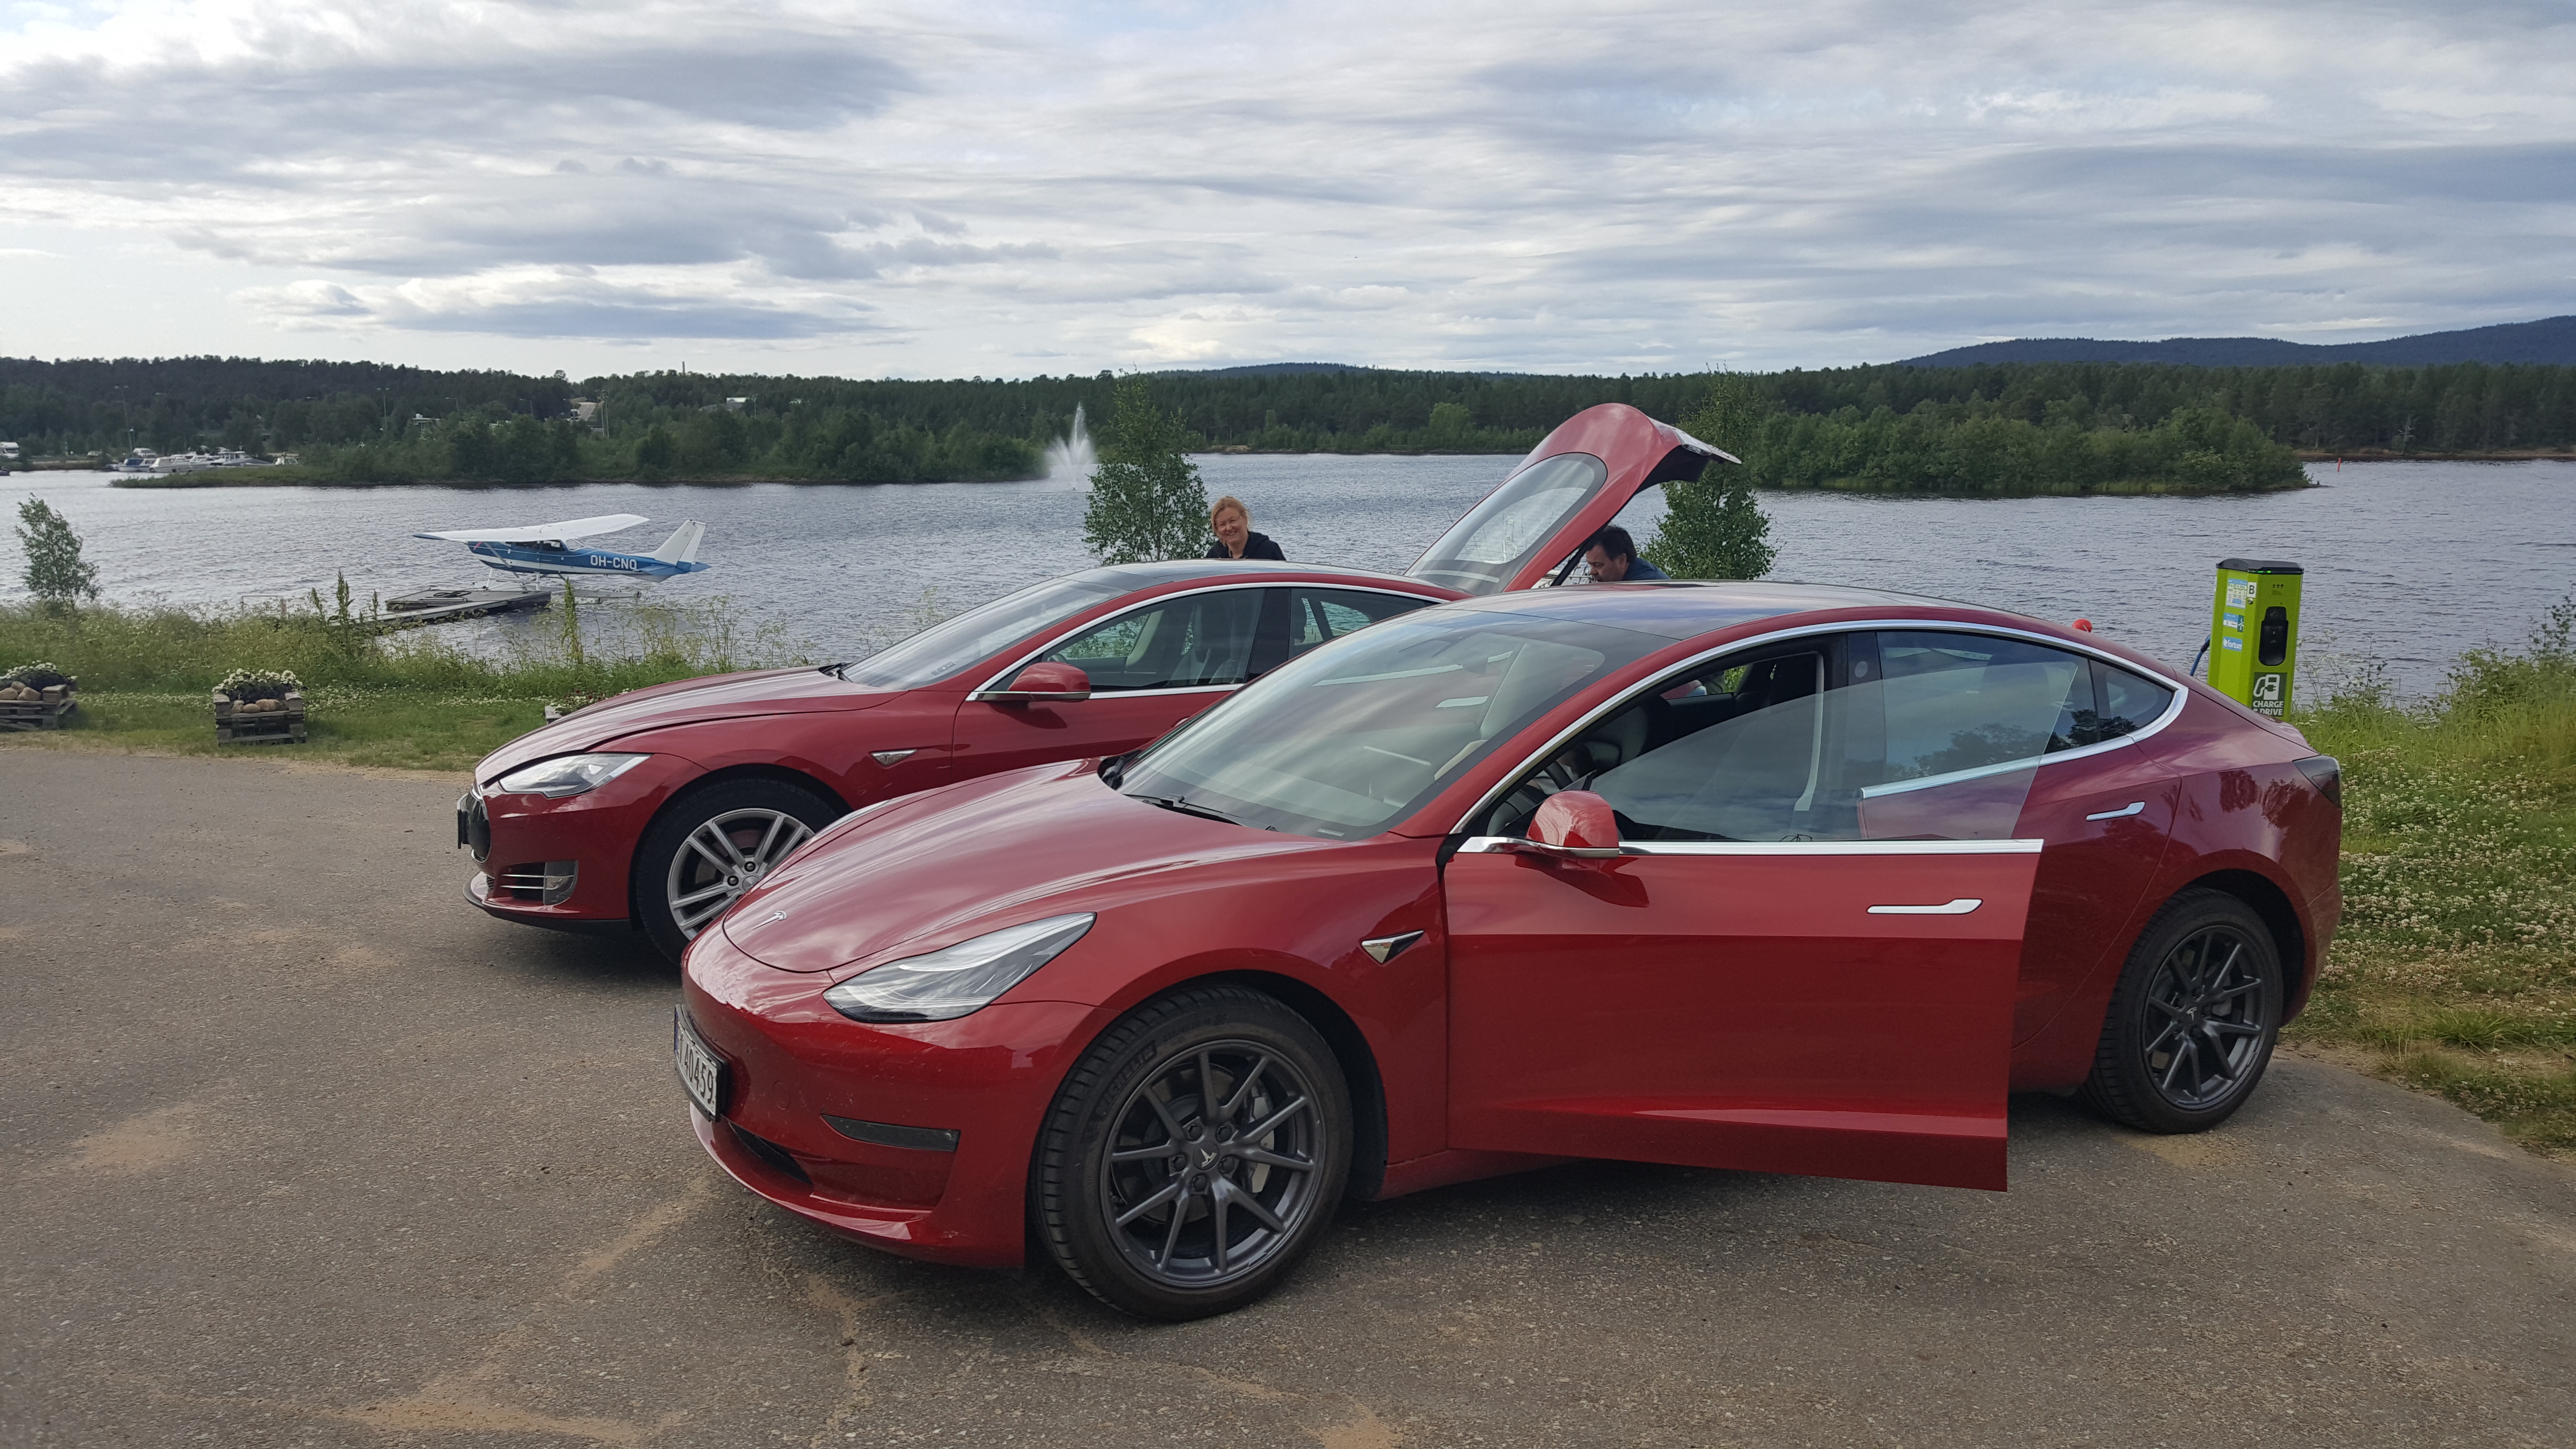 Electric cars sale grows most in Norway’s northernmost county | The ...